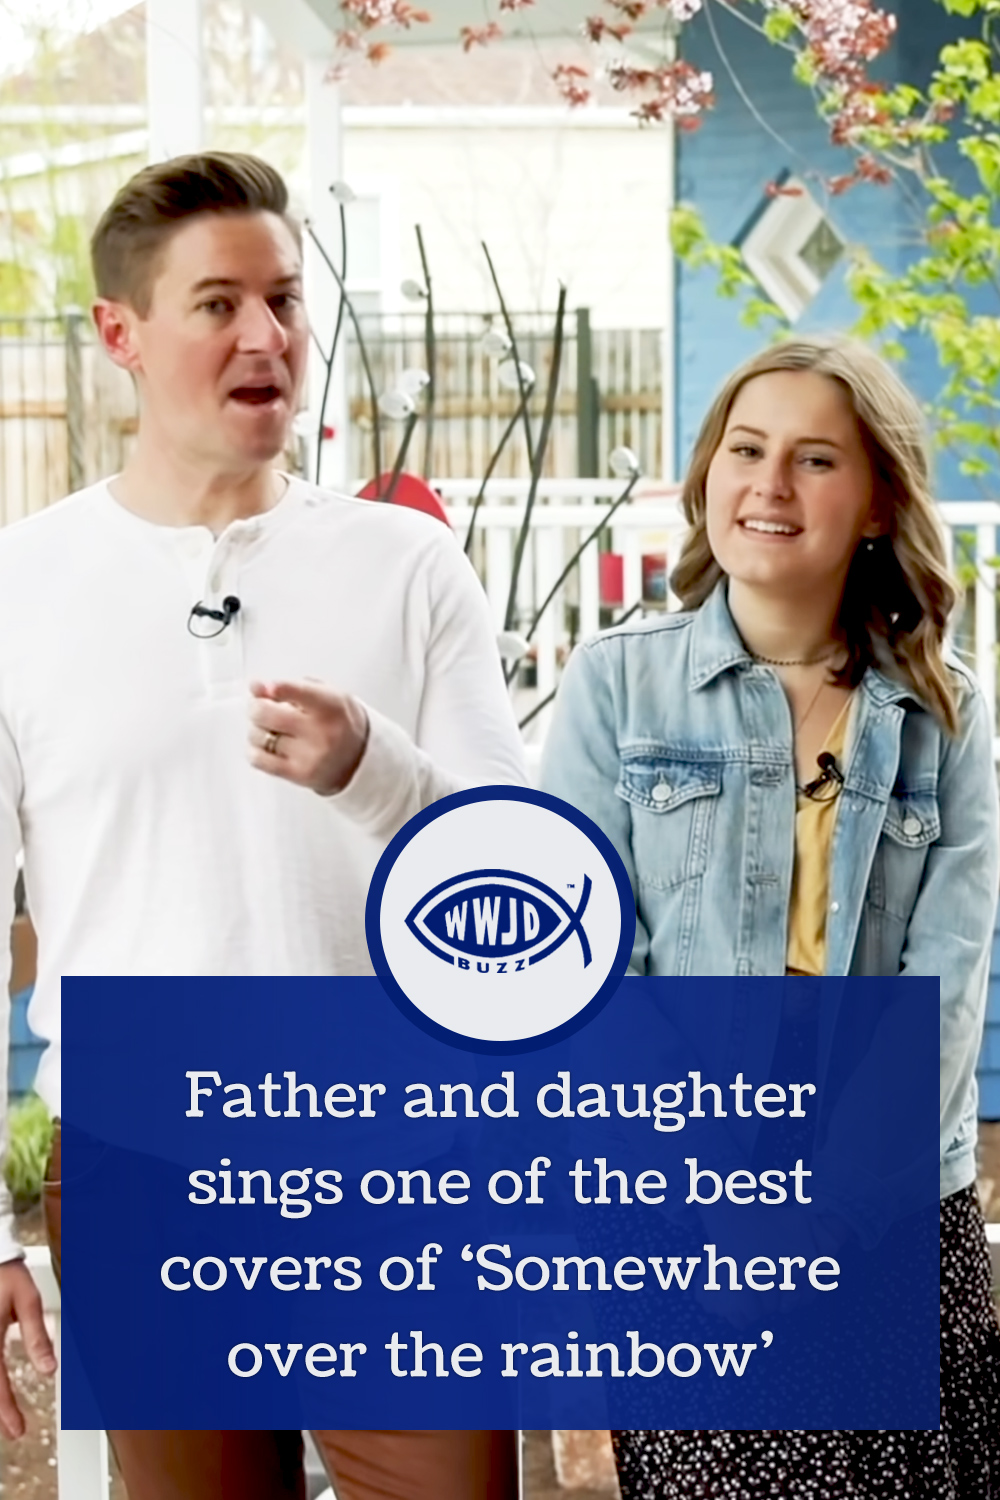 Father and daughter sings one of the best covers of ‘Somewhere over the rainbow’